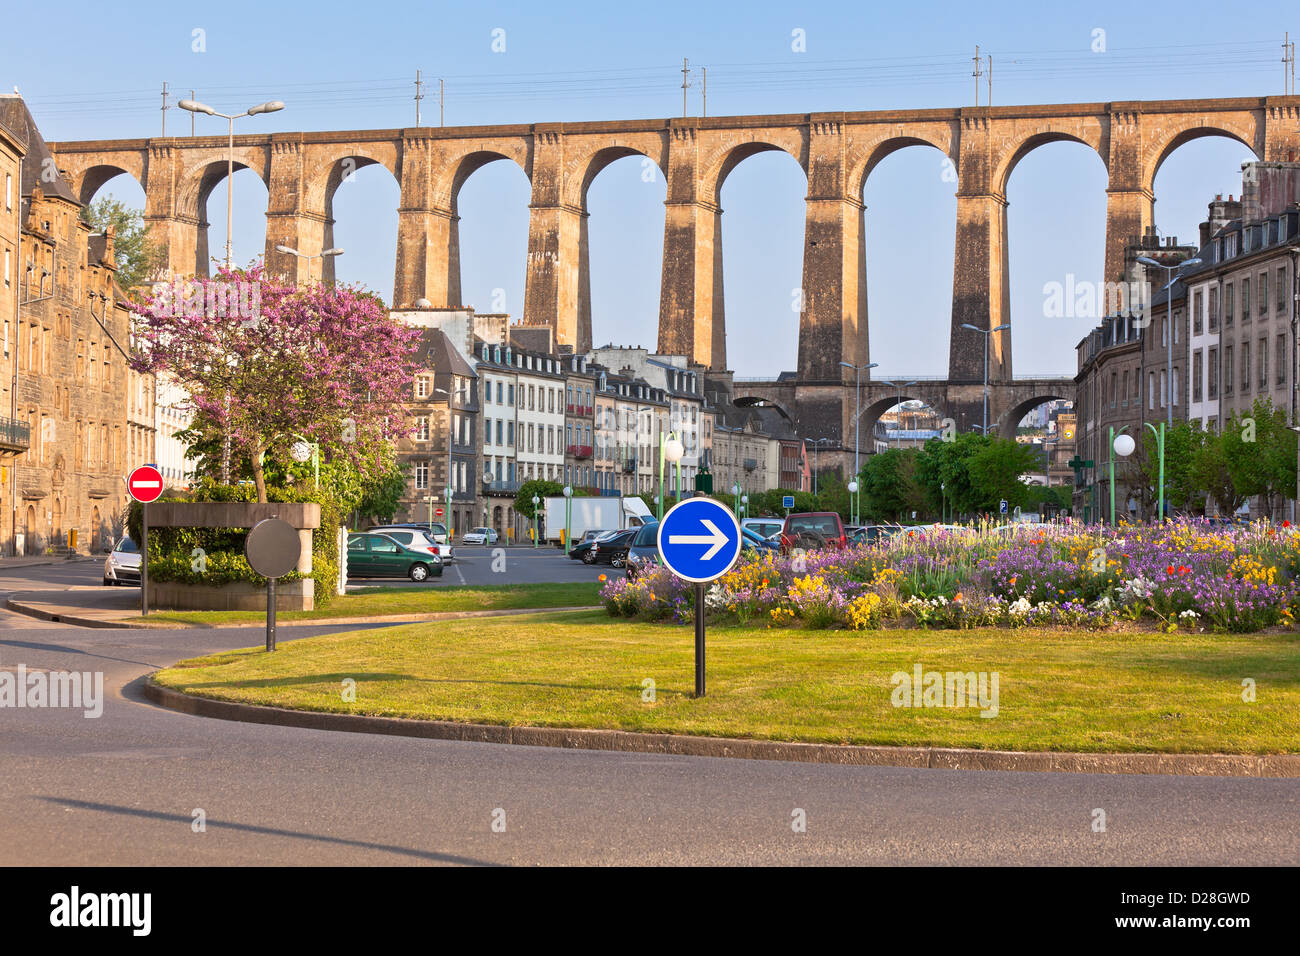 Large stone bridge in Morlaix town, Brittany, France at sunny evening Stock Photo